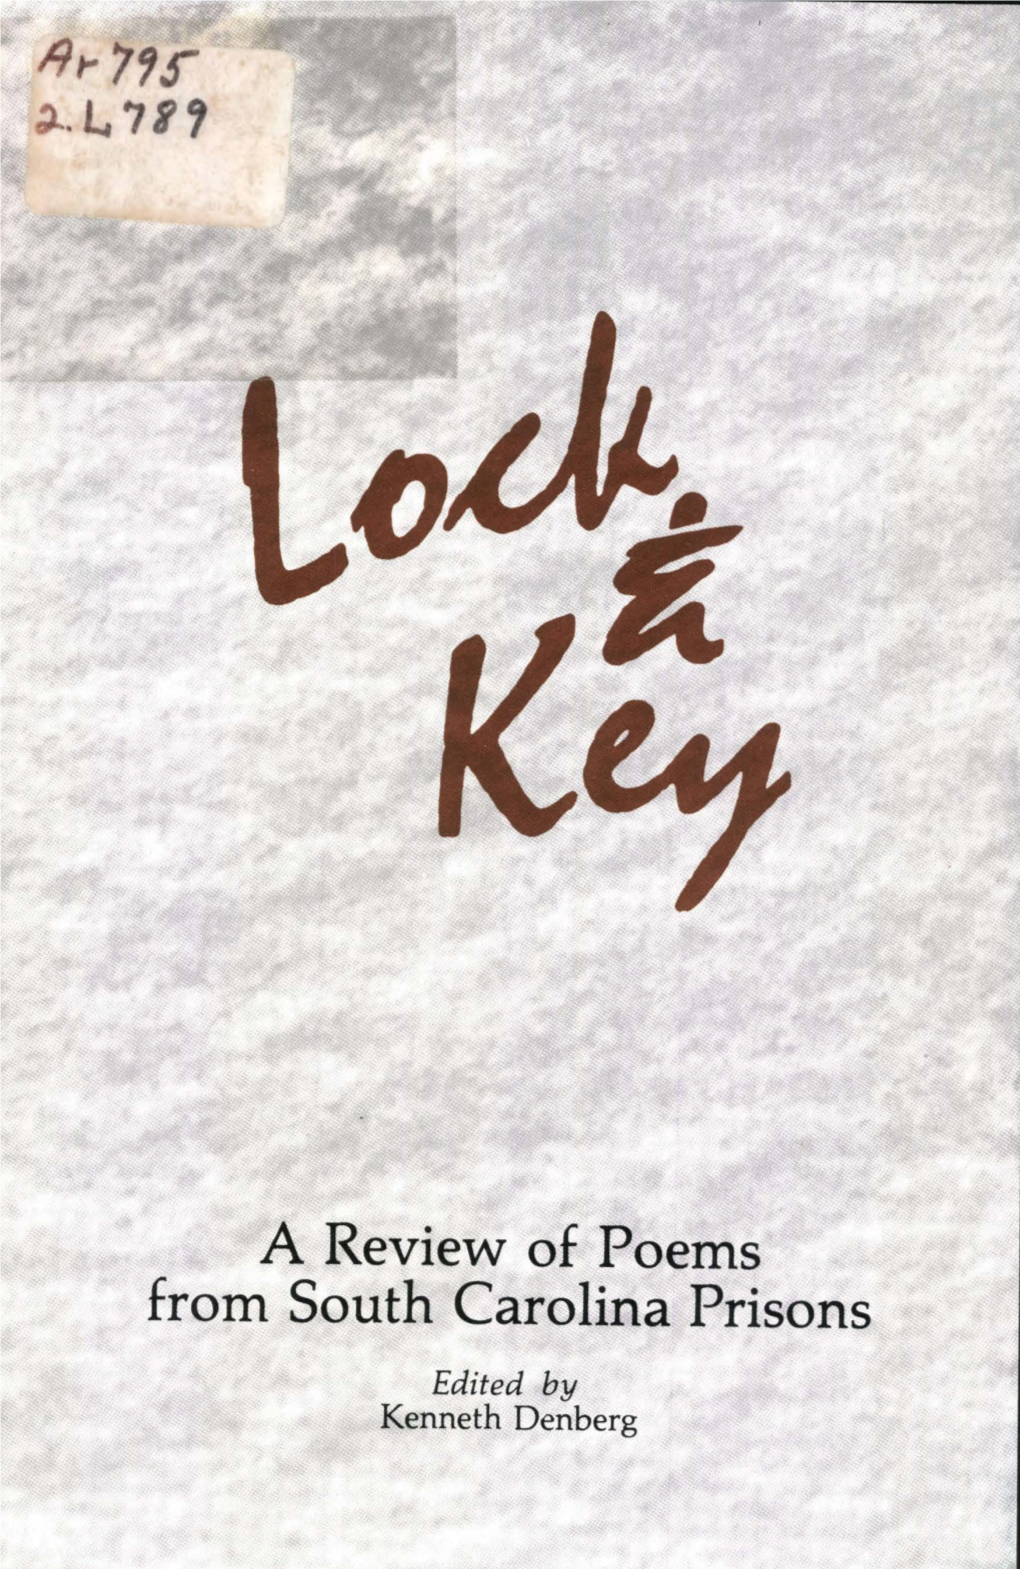 A Review of Poems from South Carolina Prisons Edited by Kenneth Denberg a Review of Poems from South Carolina Prisons